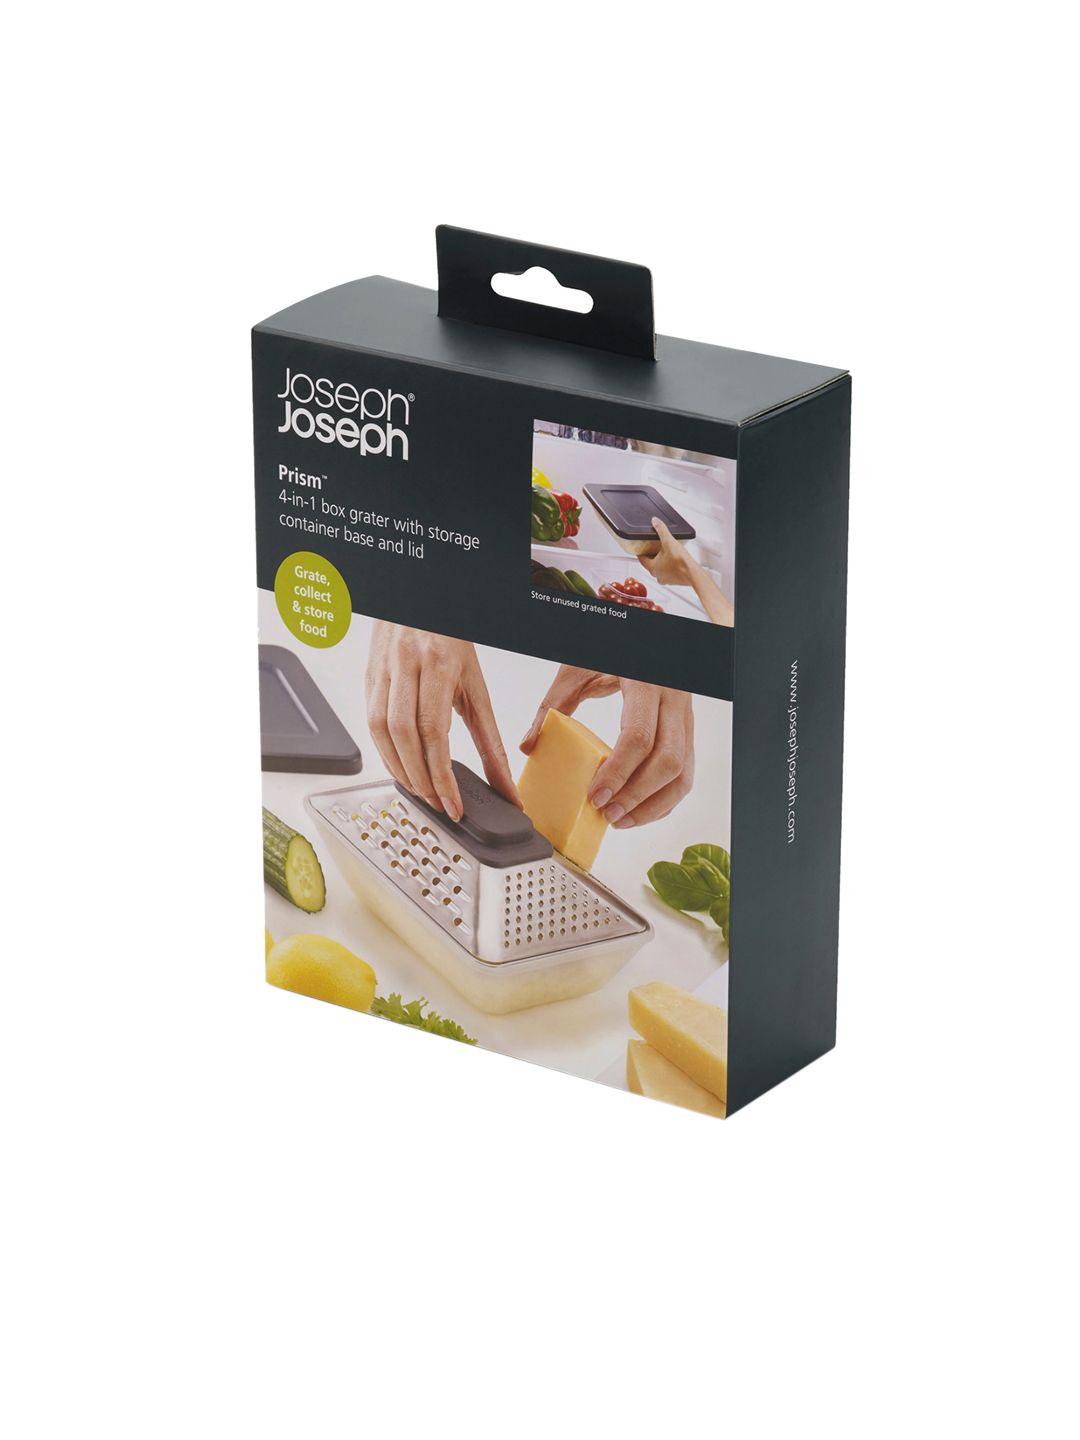 Joseph Joseph Grey & Silver-Colored Solid Stainless Steel Prism Box Grater Price in India